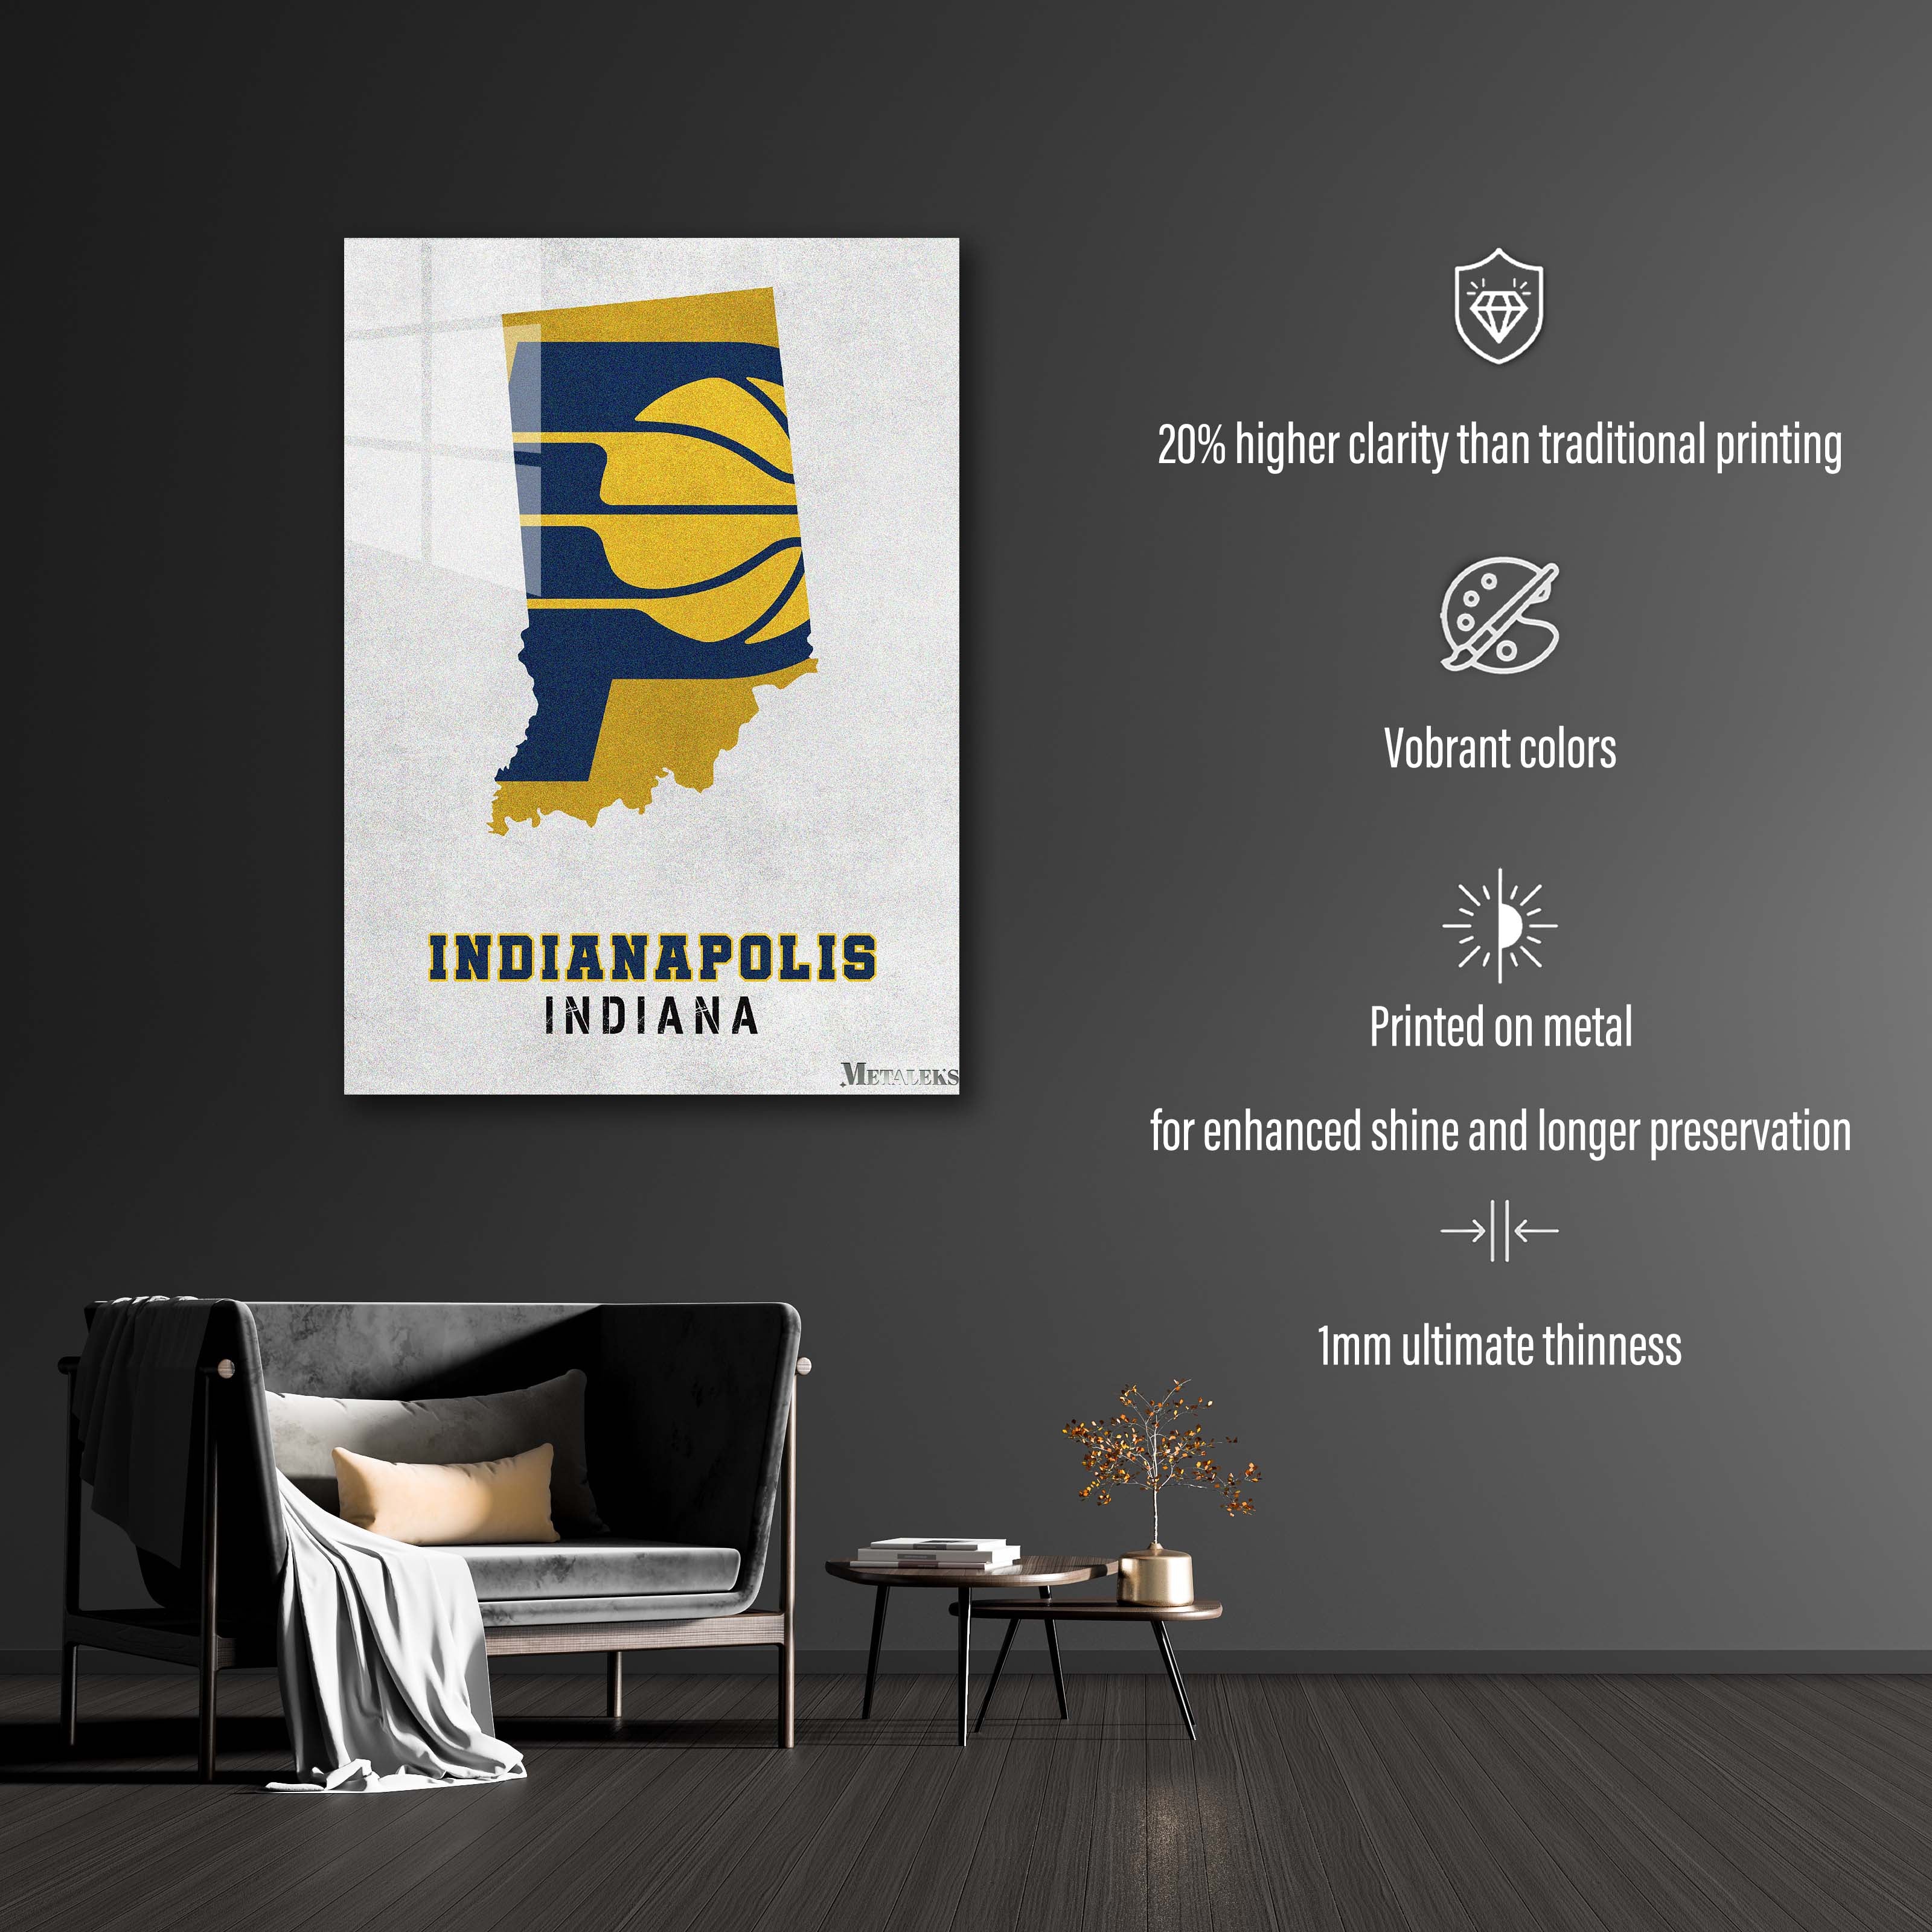 Indiana Pacers-designed by @Hoang Van Thuan